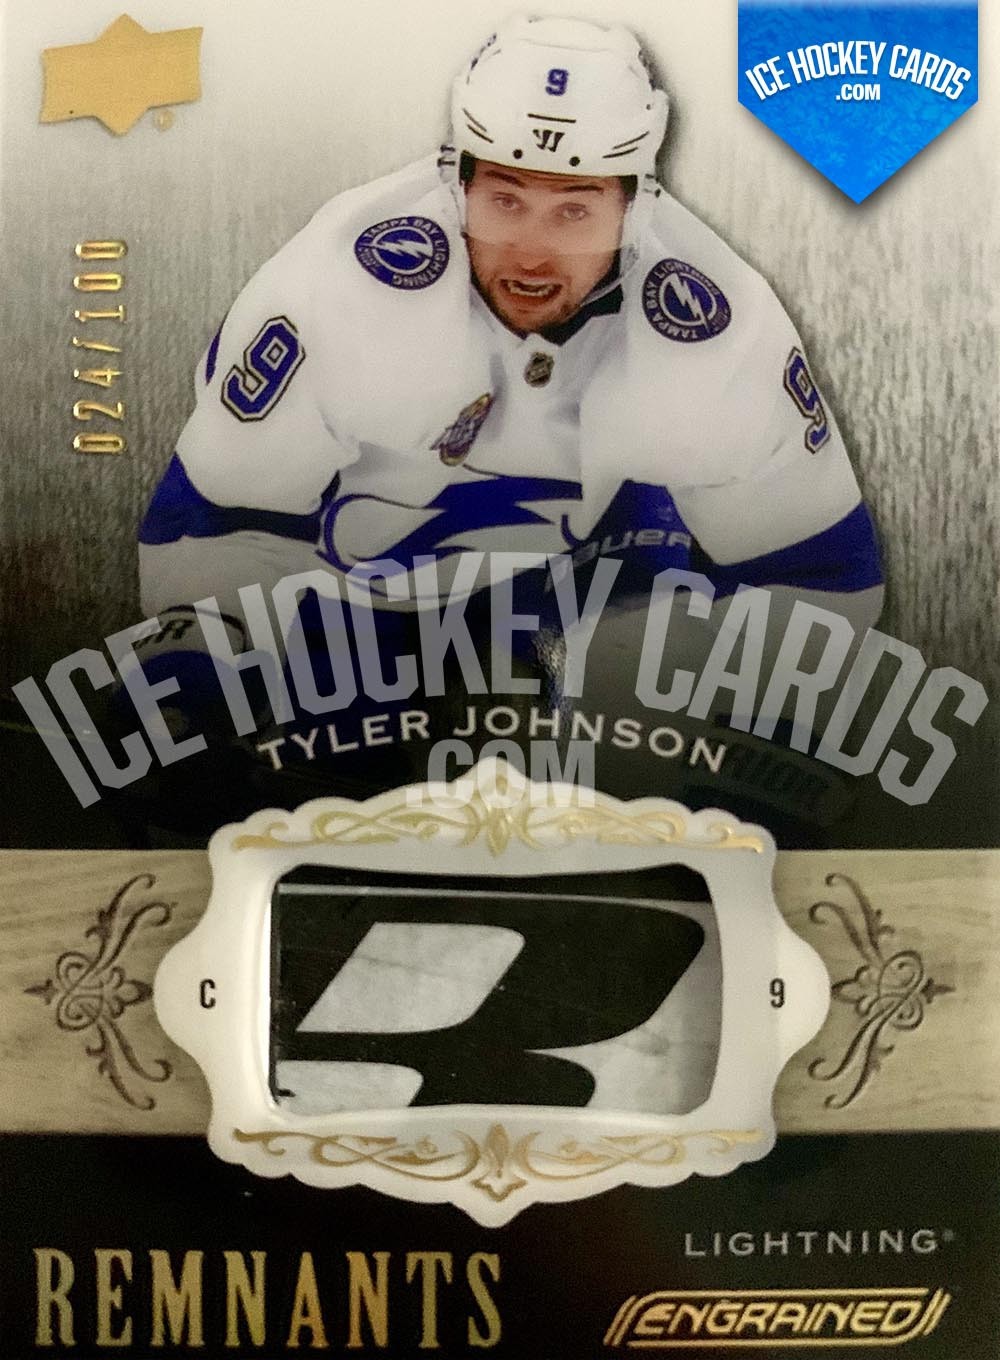 Upper Deck - Engrained 2018-19 - Tyler Johnson Remnants Sticks Game-Used # to 100